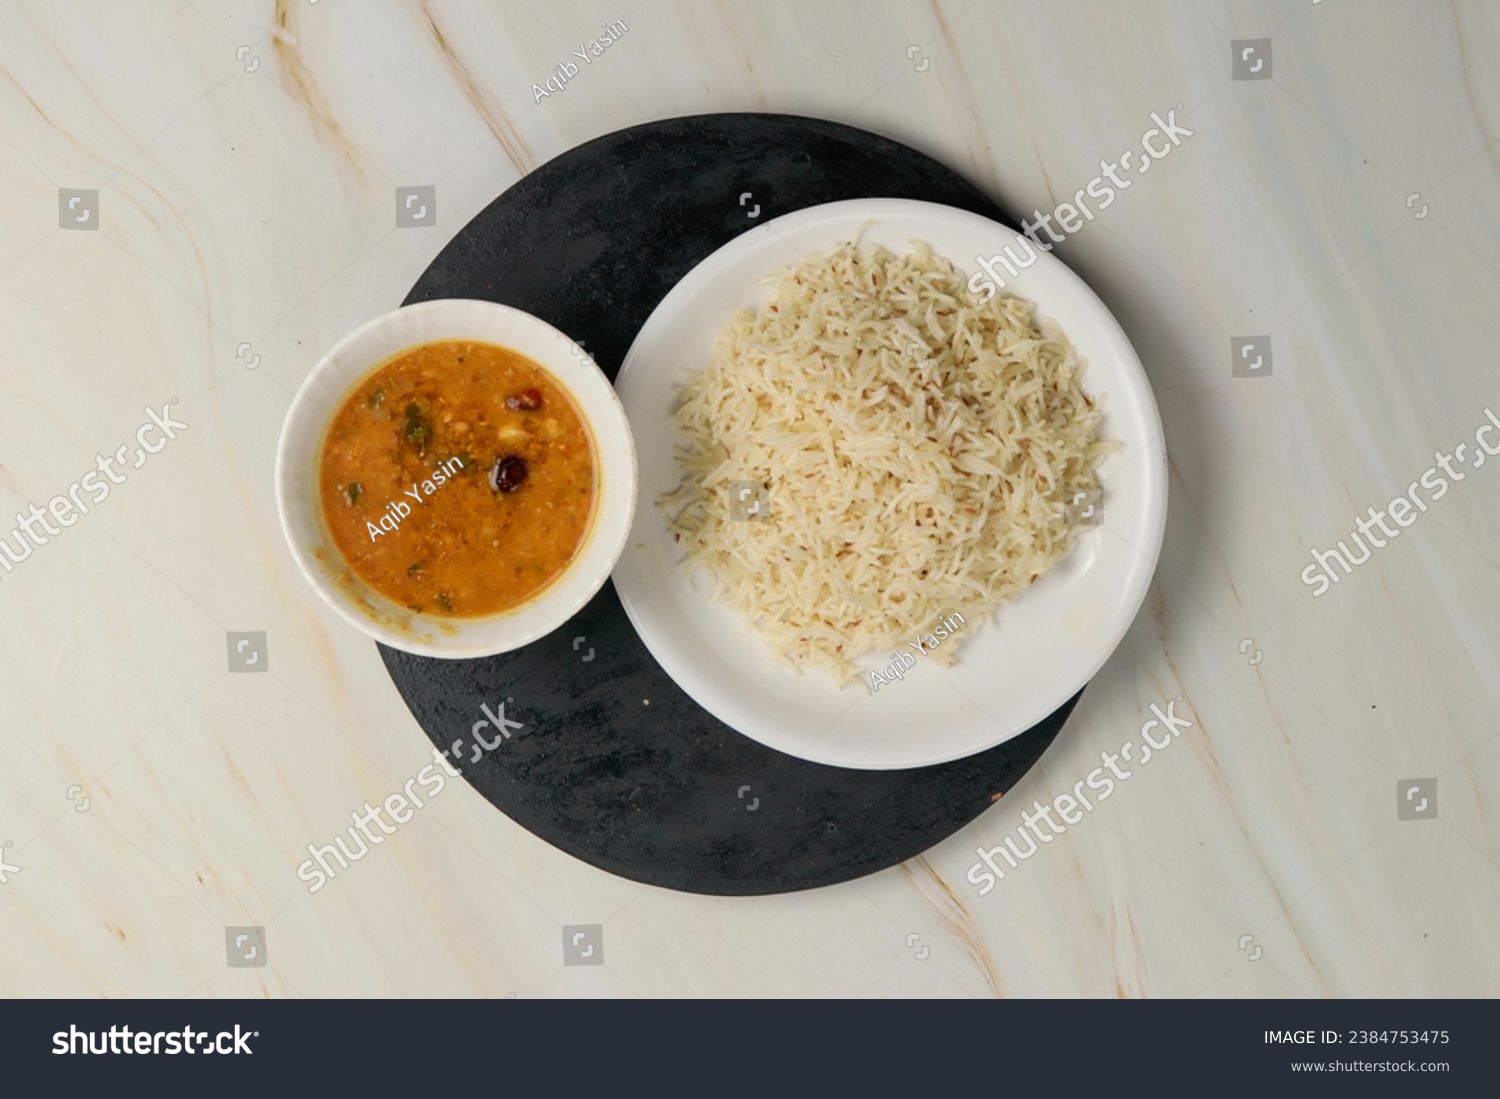 Indian Traditional Cuisine Dal Fry or Rice Also Know as Dal Chawal, Daal Chawal, Dal Rice, Whole Yellow Lentil with Rice or Dal Tadka, Daal Fry Served with Rice #2384753475